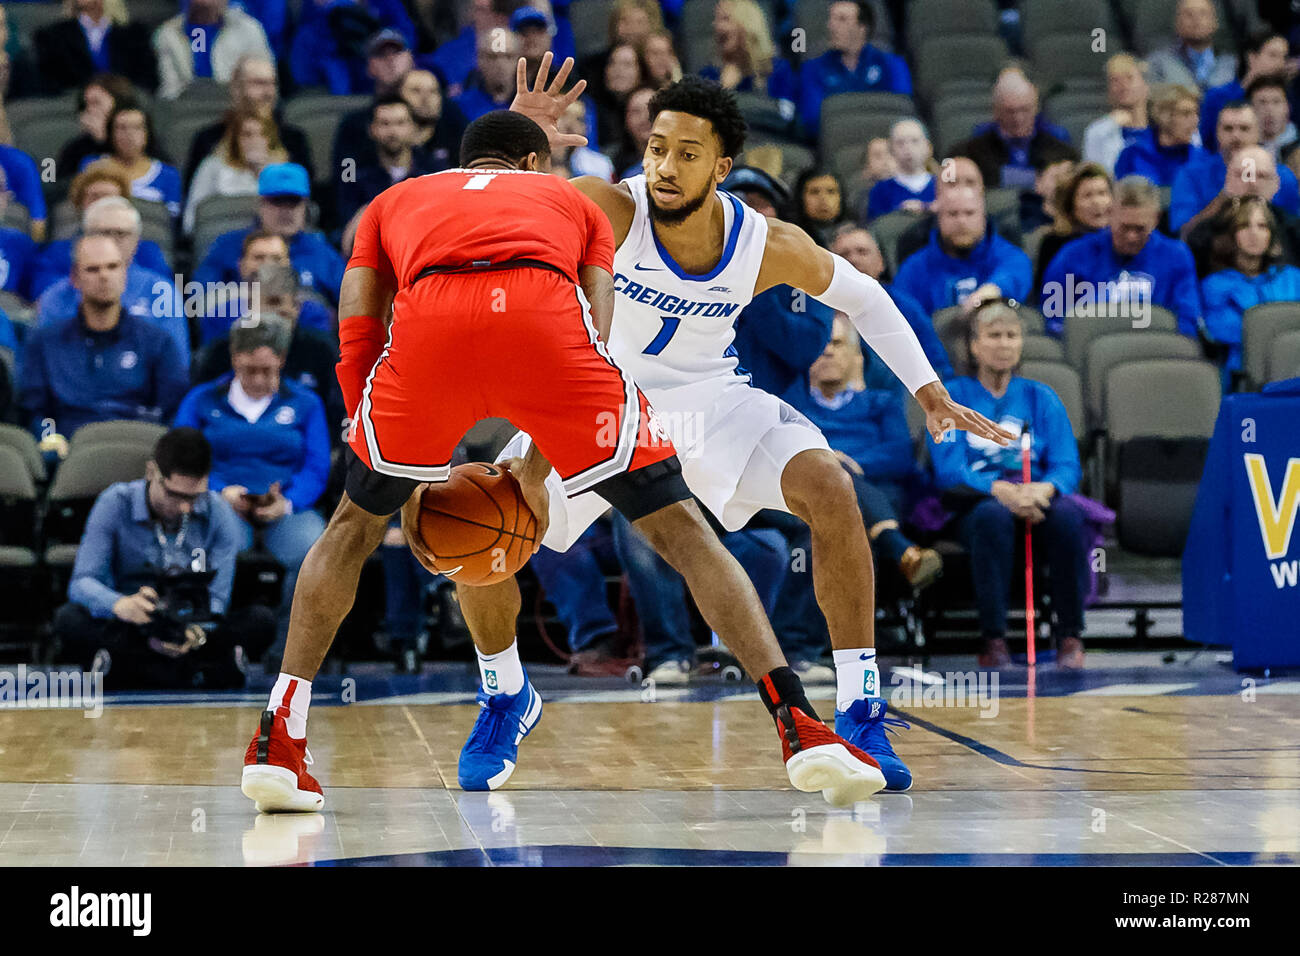 Omaha, Nebraska, USA. 15th November 2018. Creighton Bluejays guard Ty-Shon  Alexander #5 in action during an NCAA men's basketball game between Ohio  State Buckeyes and Creighton Bluejays at the CHI Health Center